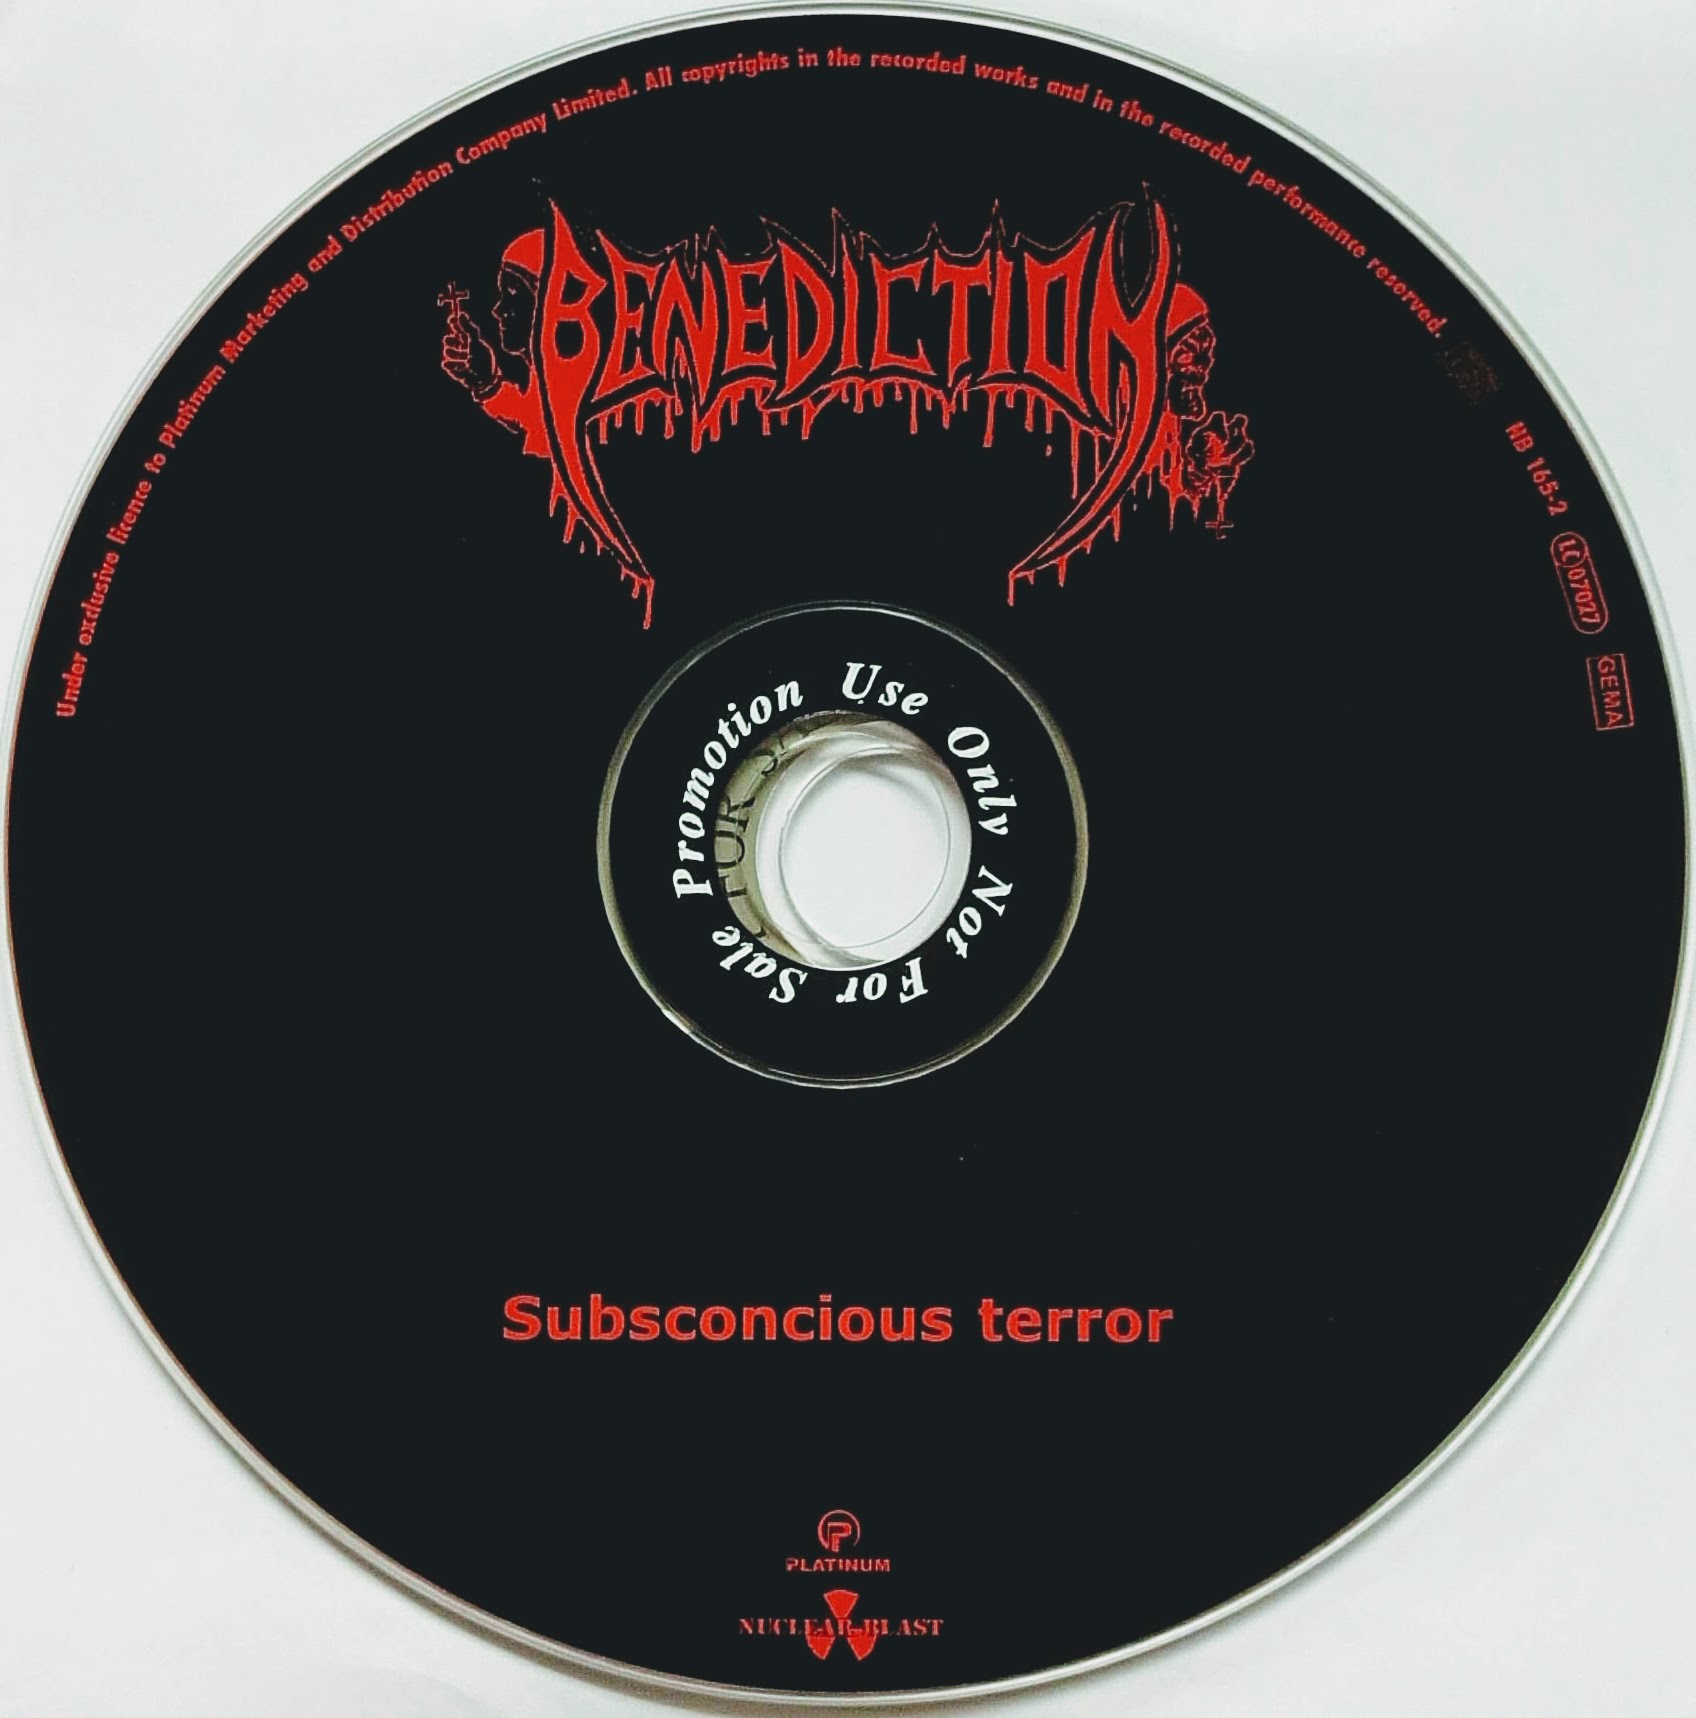 CD (Promotion) Benediction - Subconscious Terroe/The Grand Leveller (Reloaded) (CD Only)